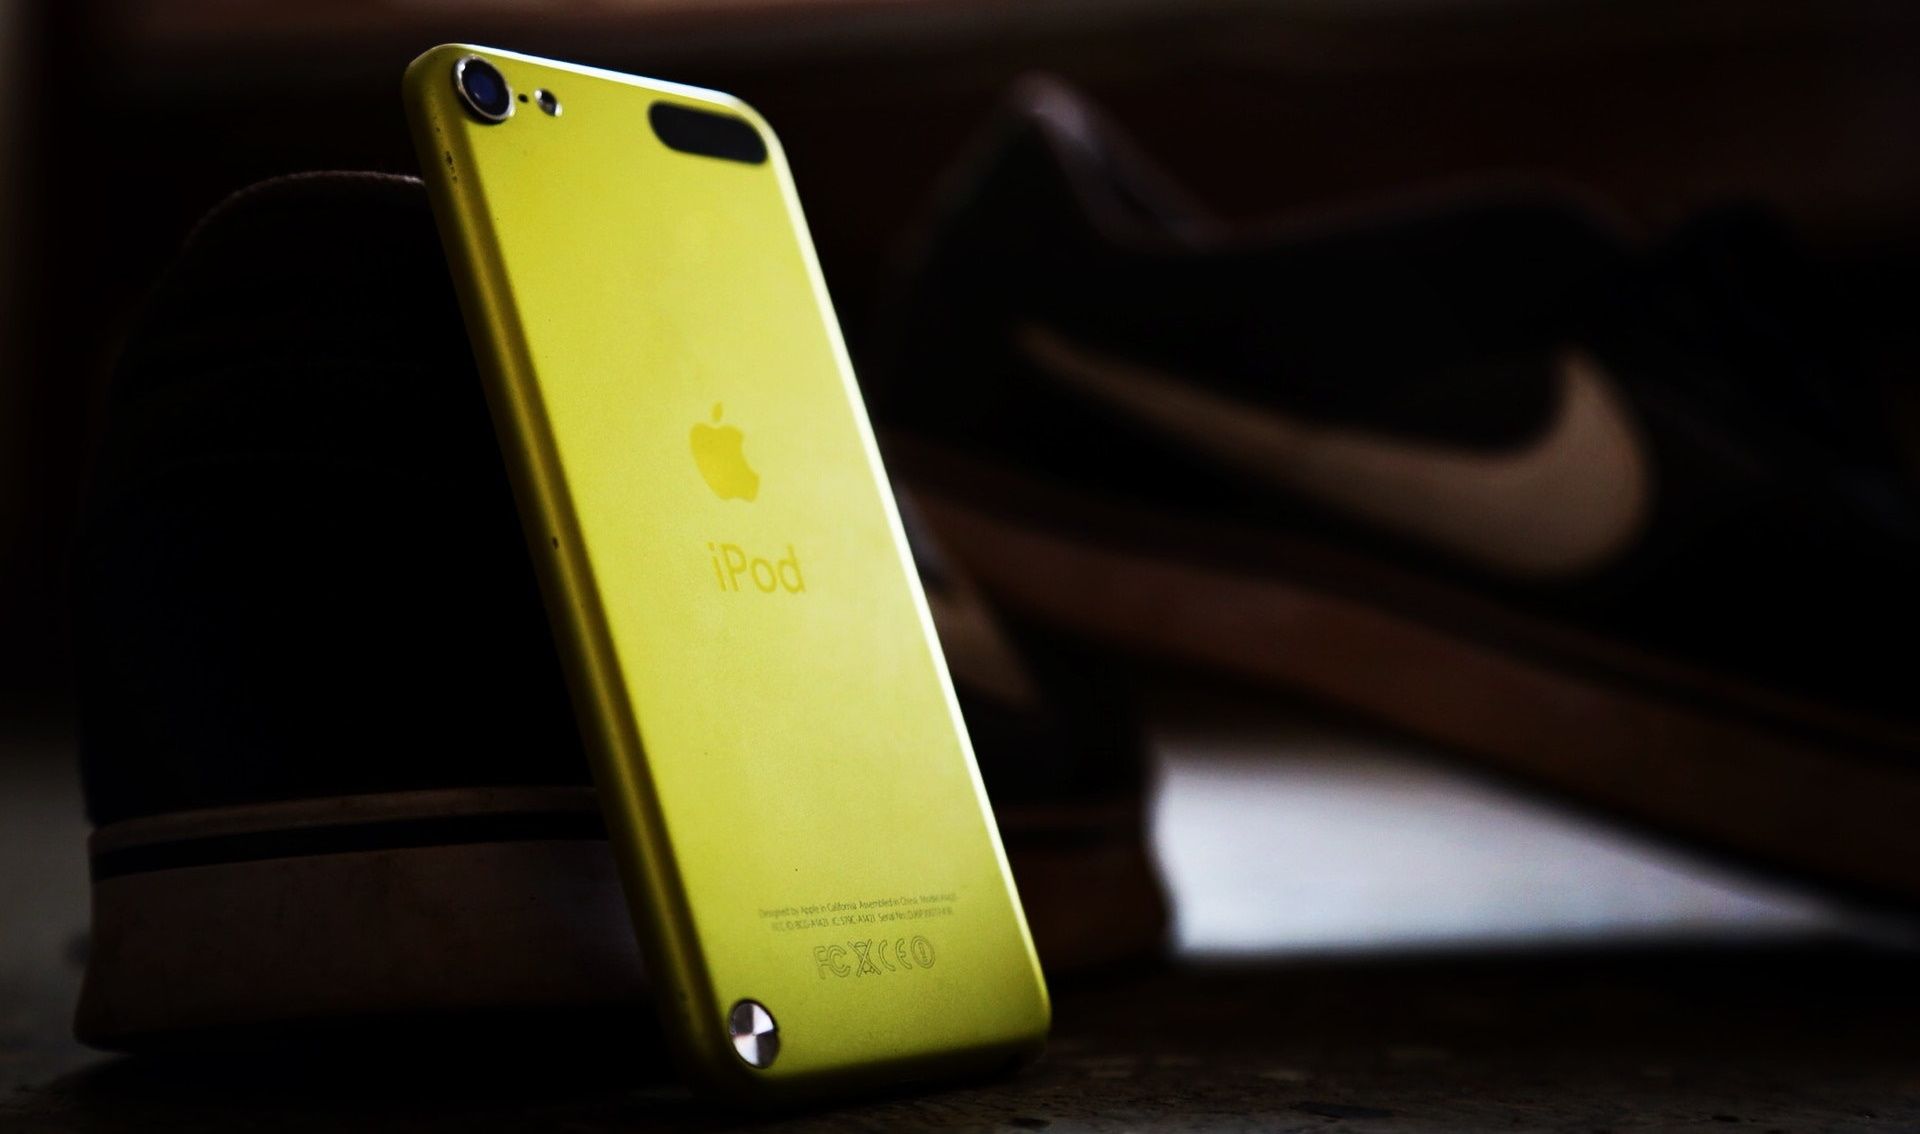 iPod Touch in yellow color